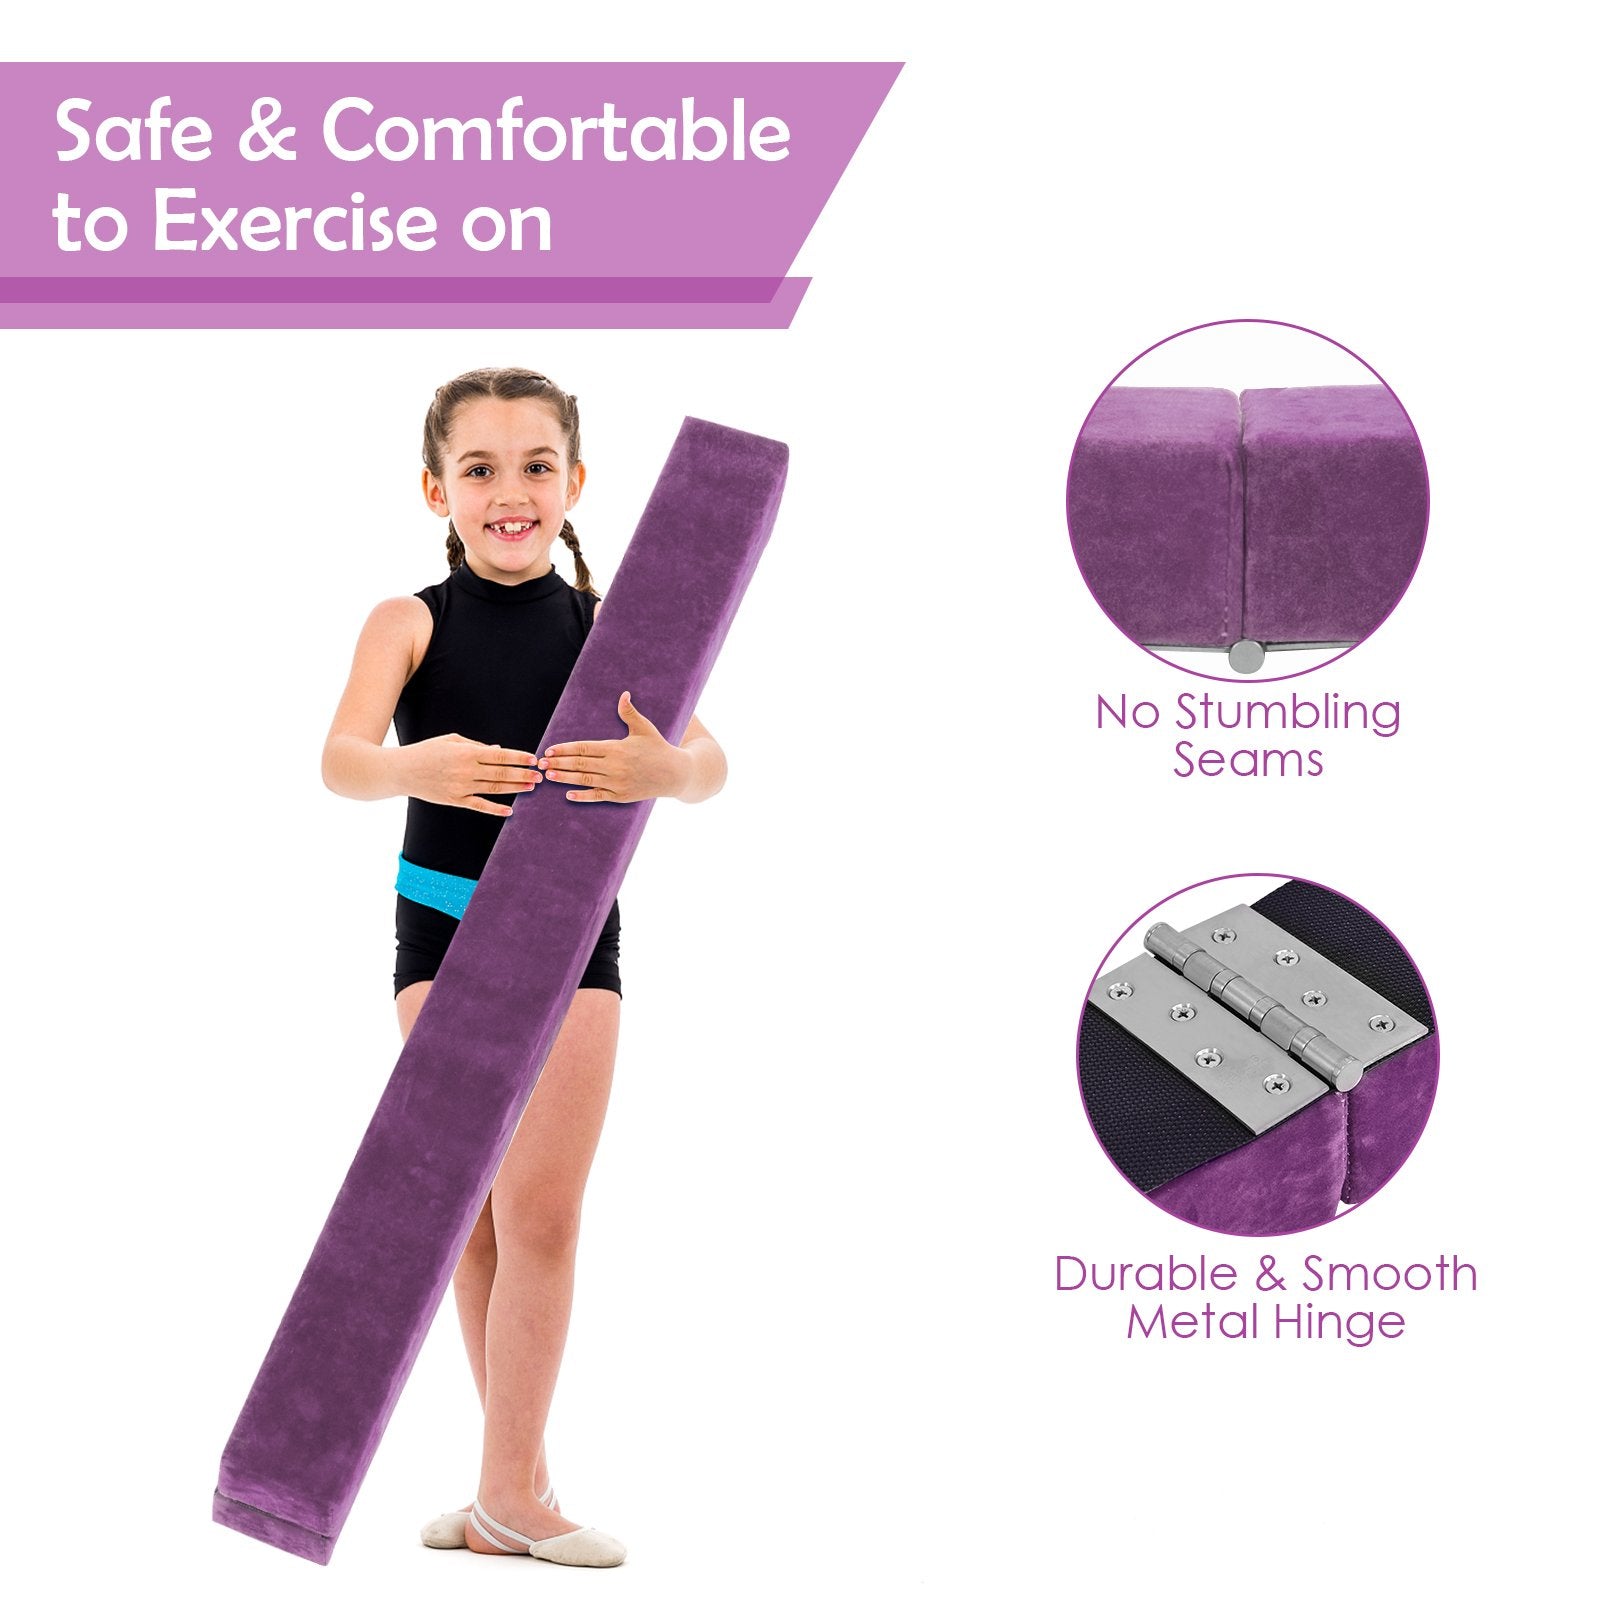 7 Feet Folding Portable Floor Balance Beam with Handles for Gymnasts, Purple at Gallery Canada